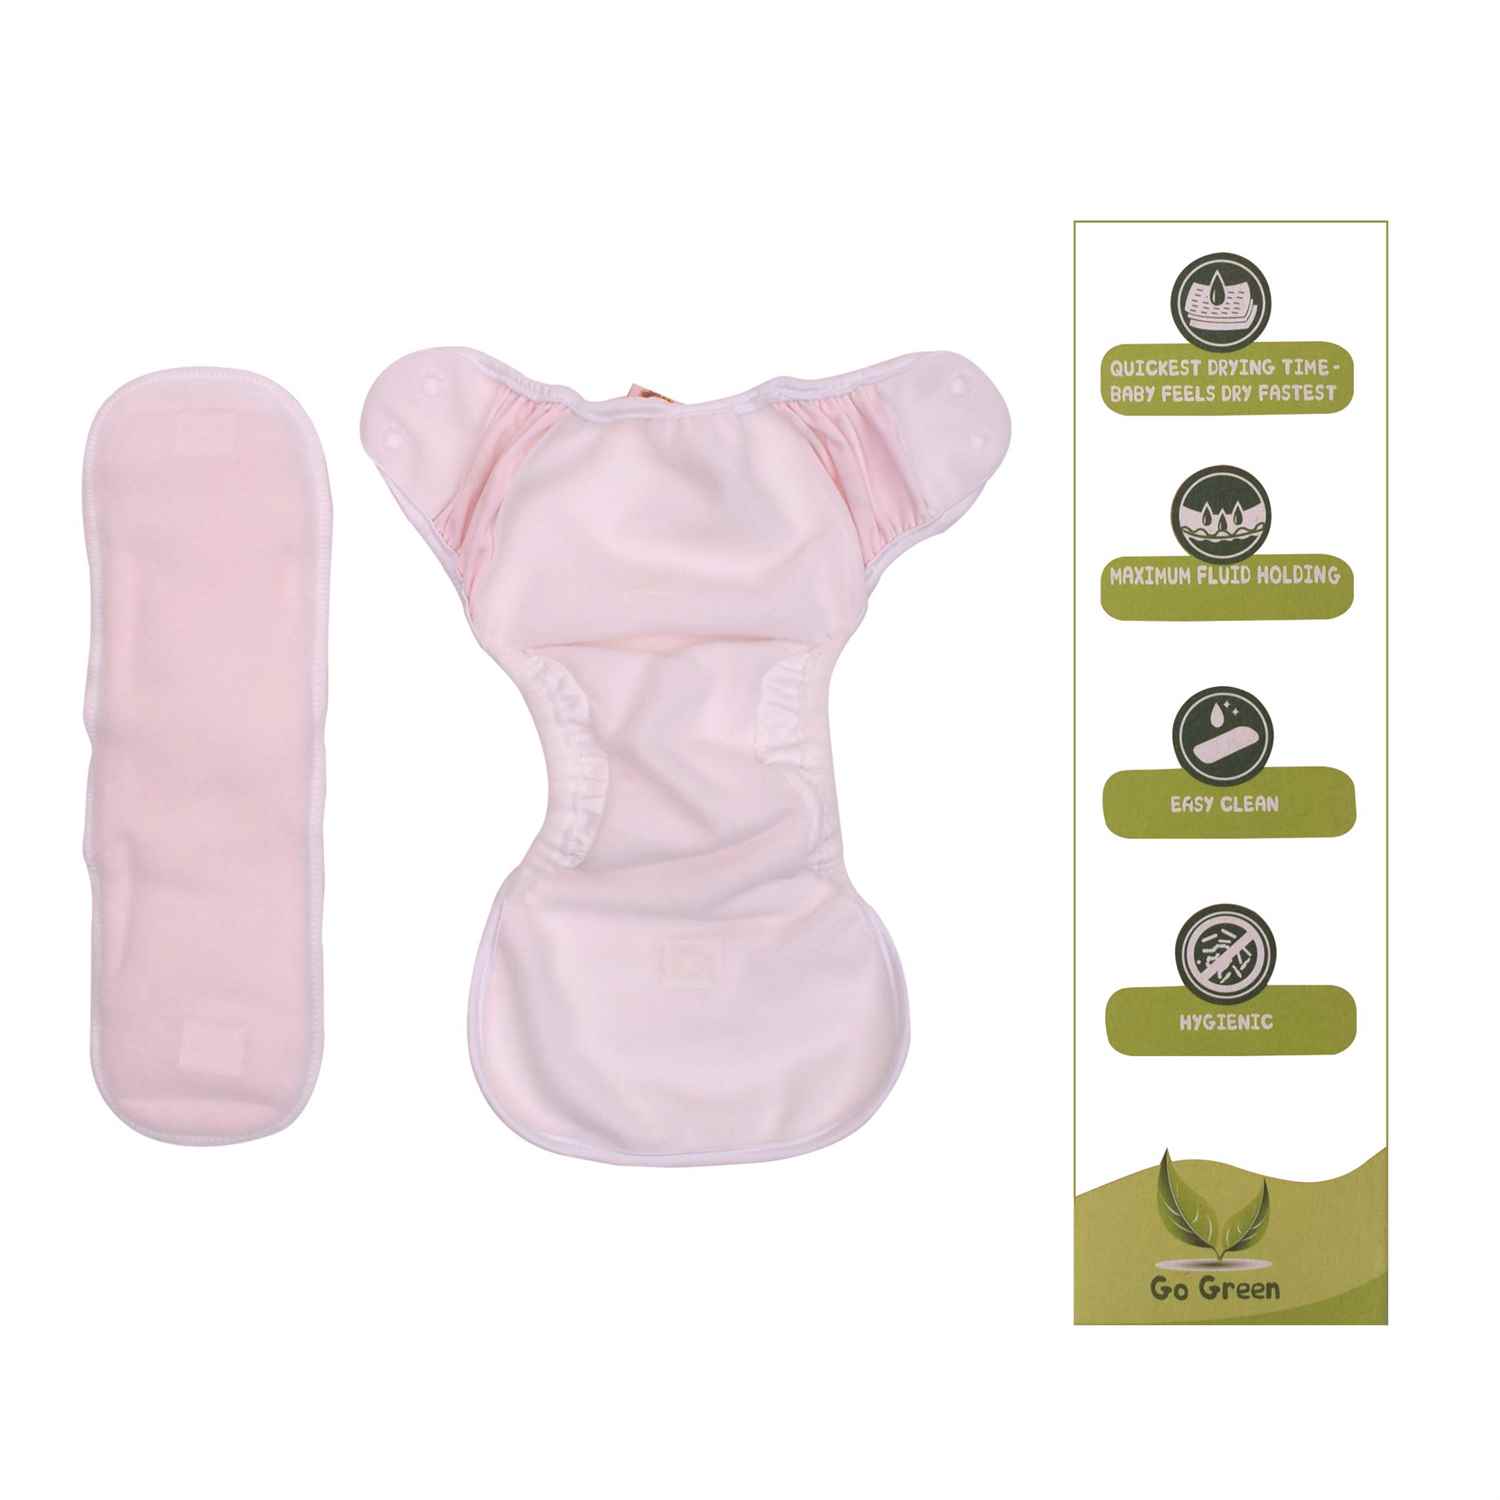 PAW PAW Baby Reusable Fabric Diaper with Pad, Size L (8-12kg)-Pink